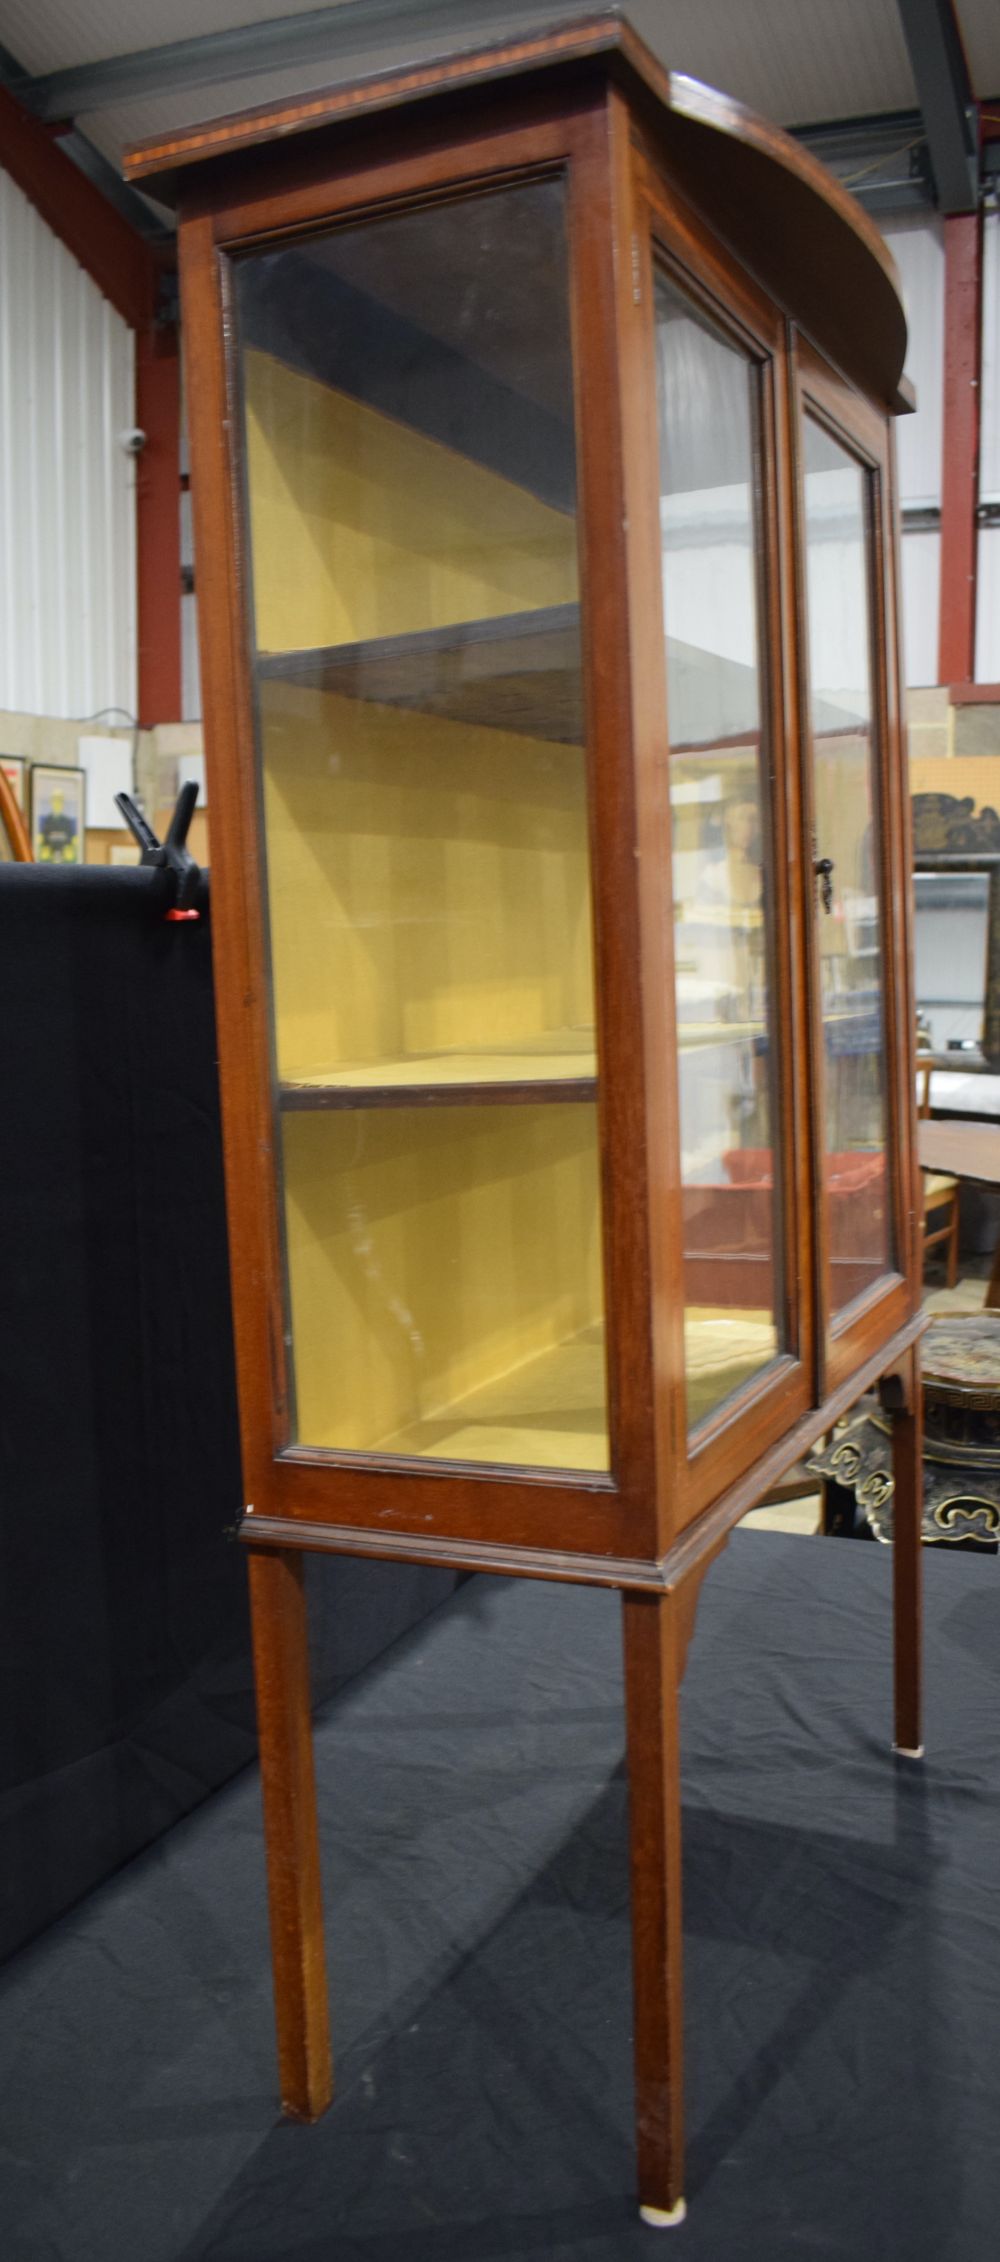 An Edwardian glass fronted inlaid display cabinet 120 x 76 x 34 cm - Image 7 of 10